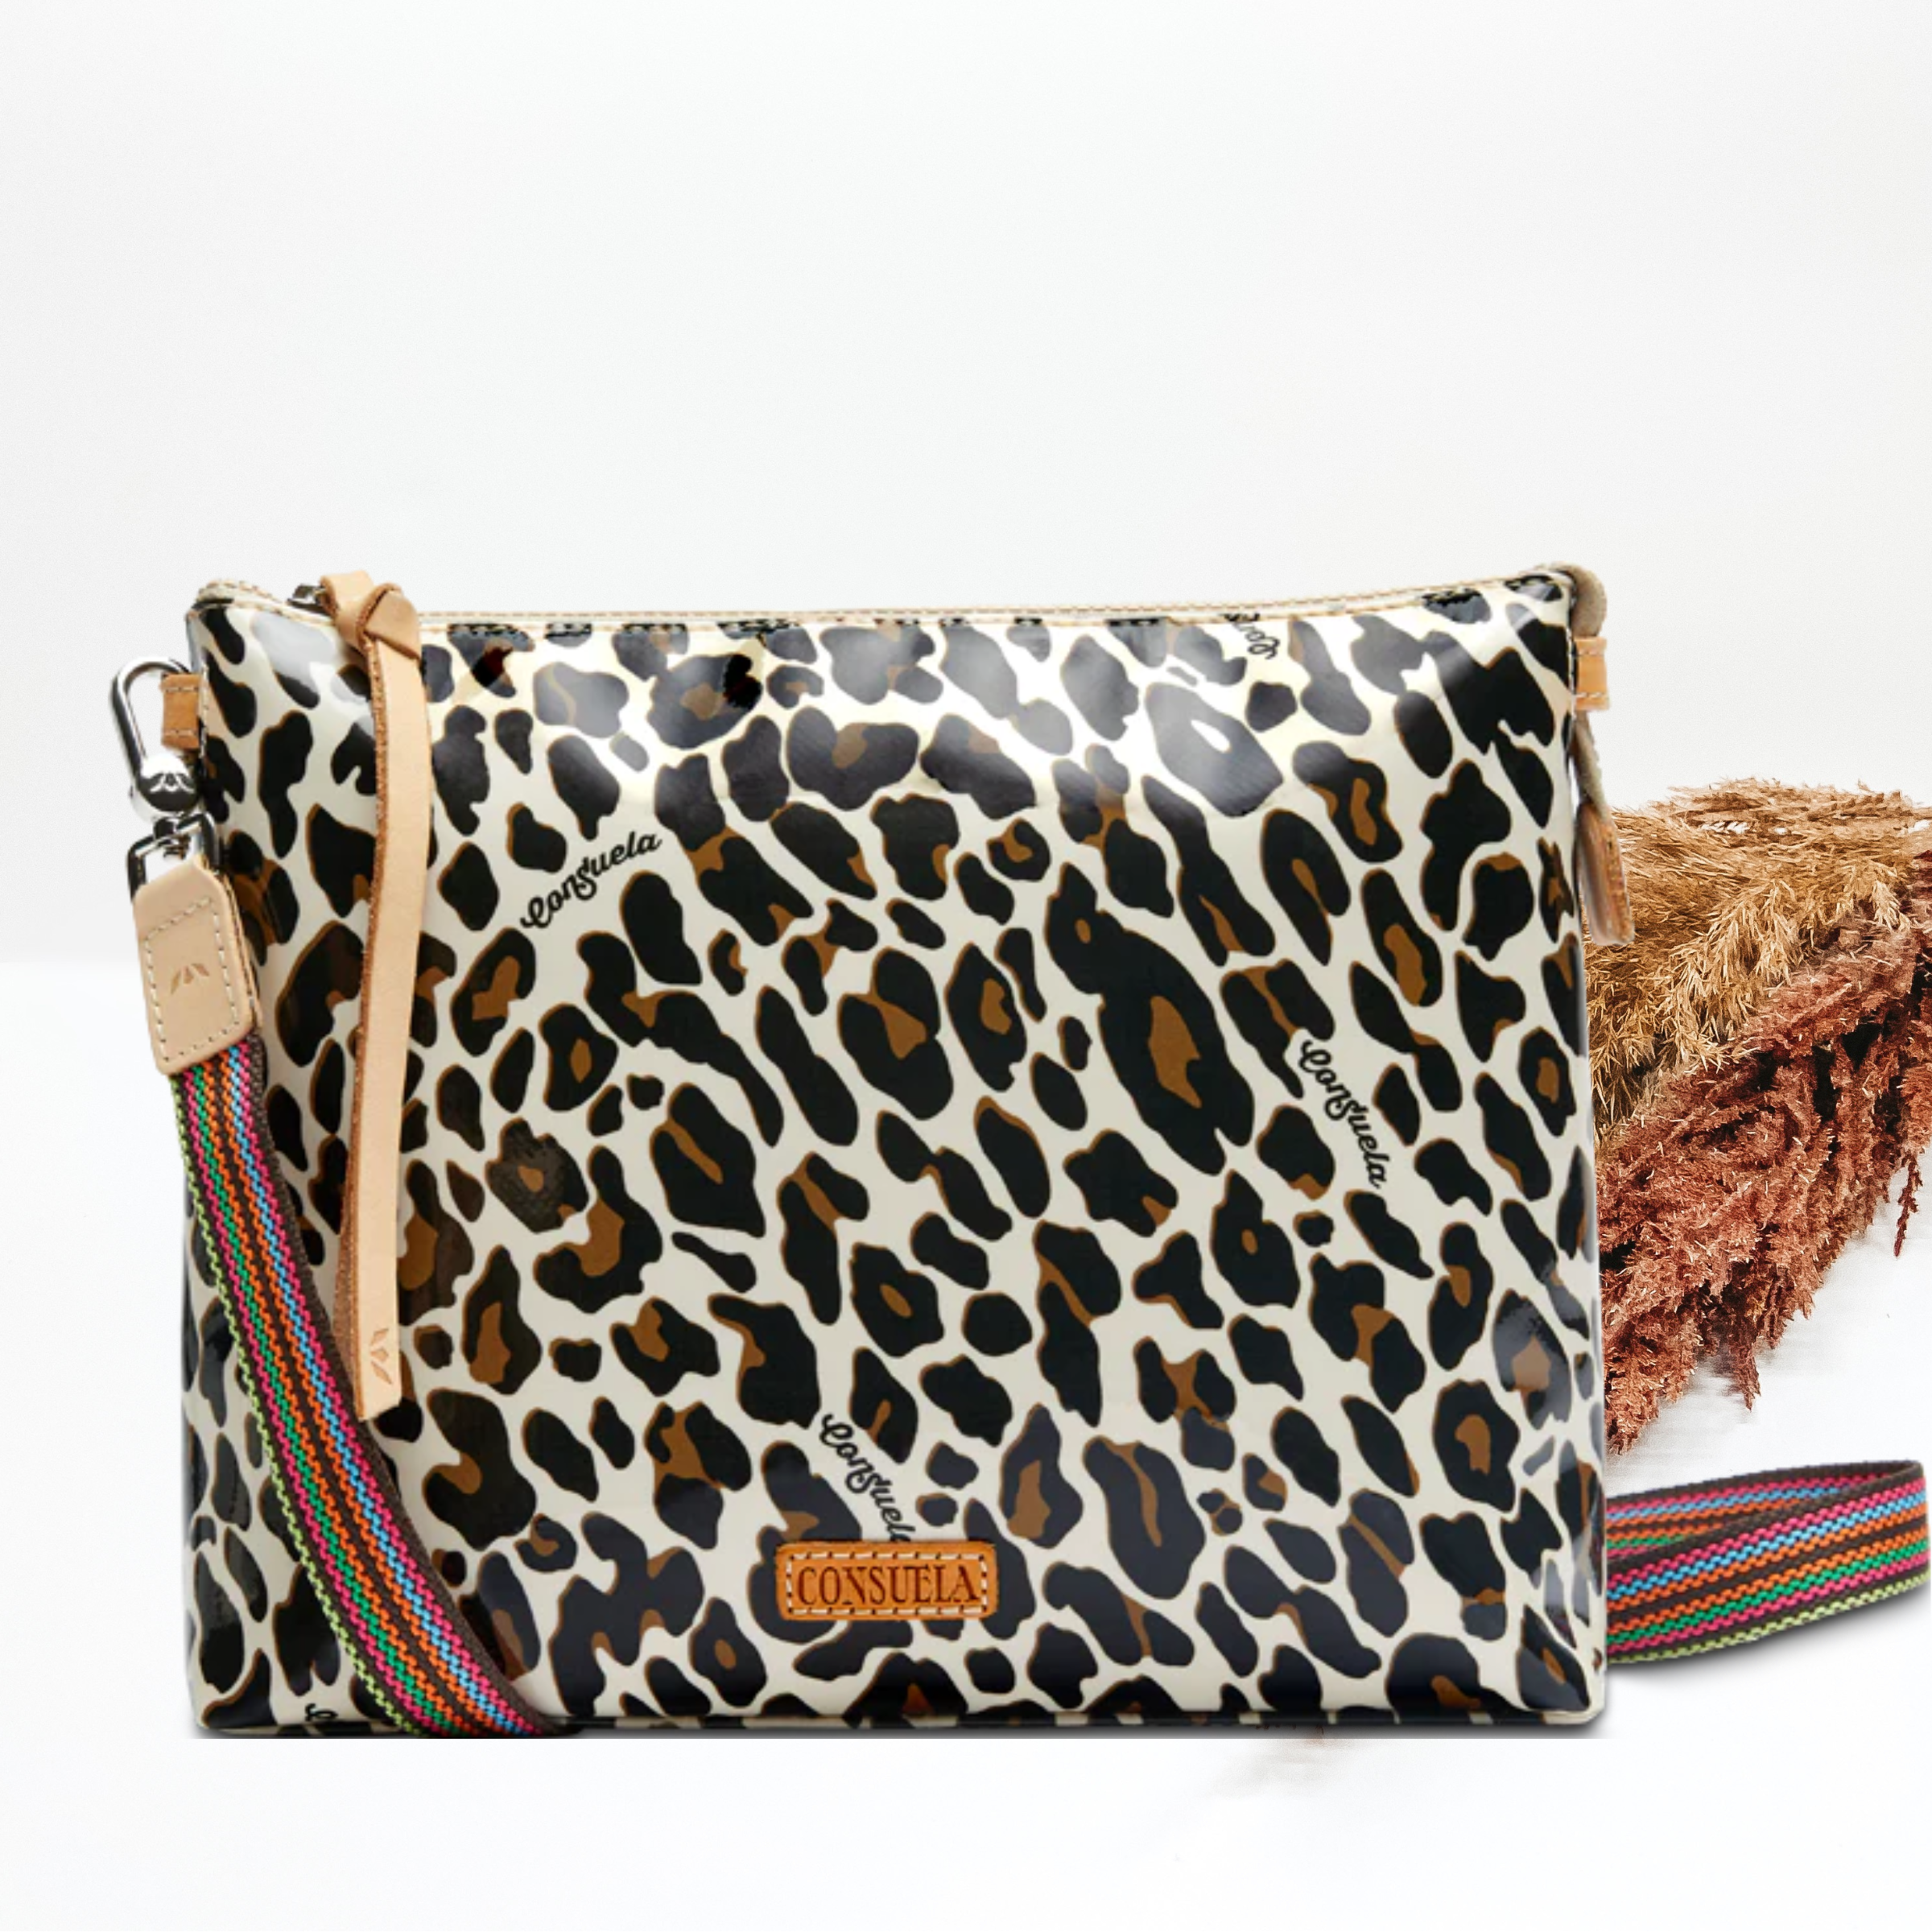 A leopard print crossbody bag with a colorful strap. Pictured on white background with brown pompous grass on the right side.